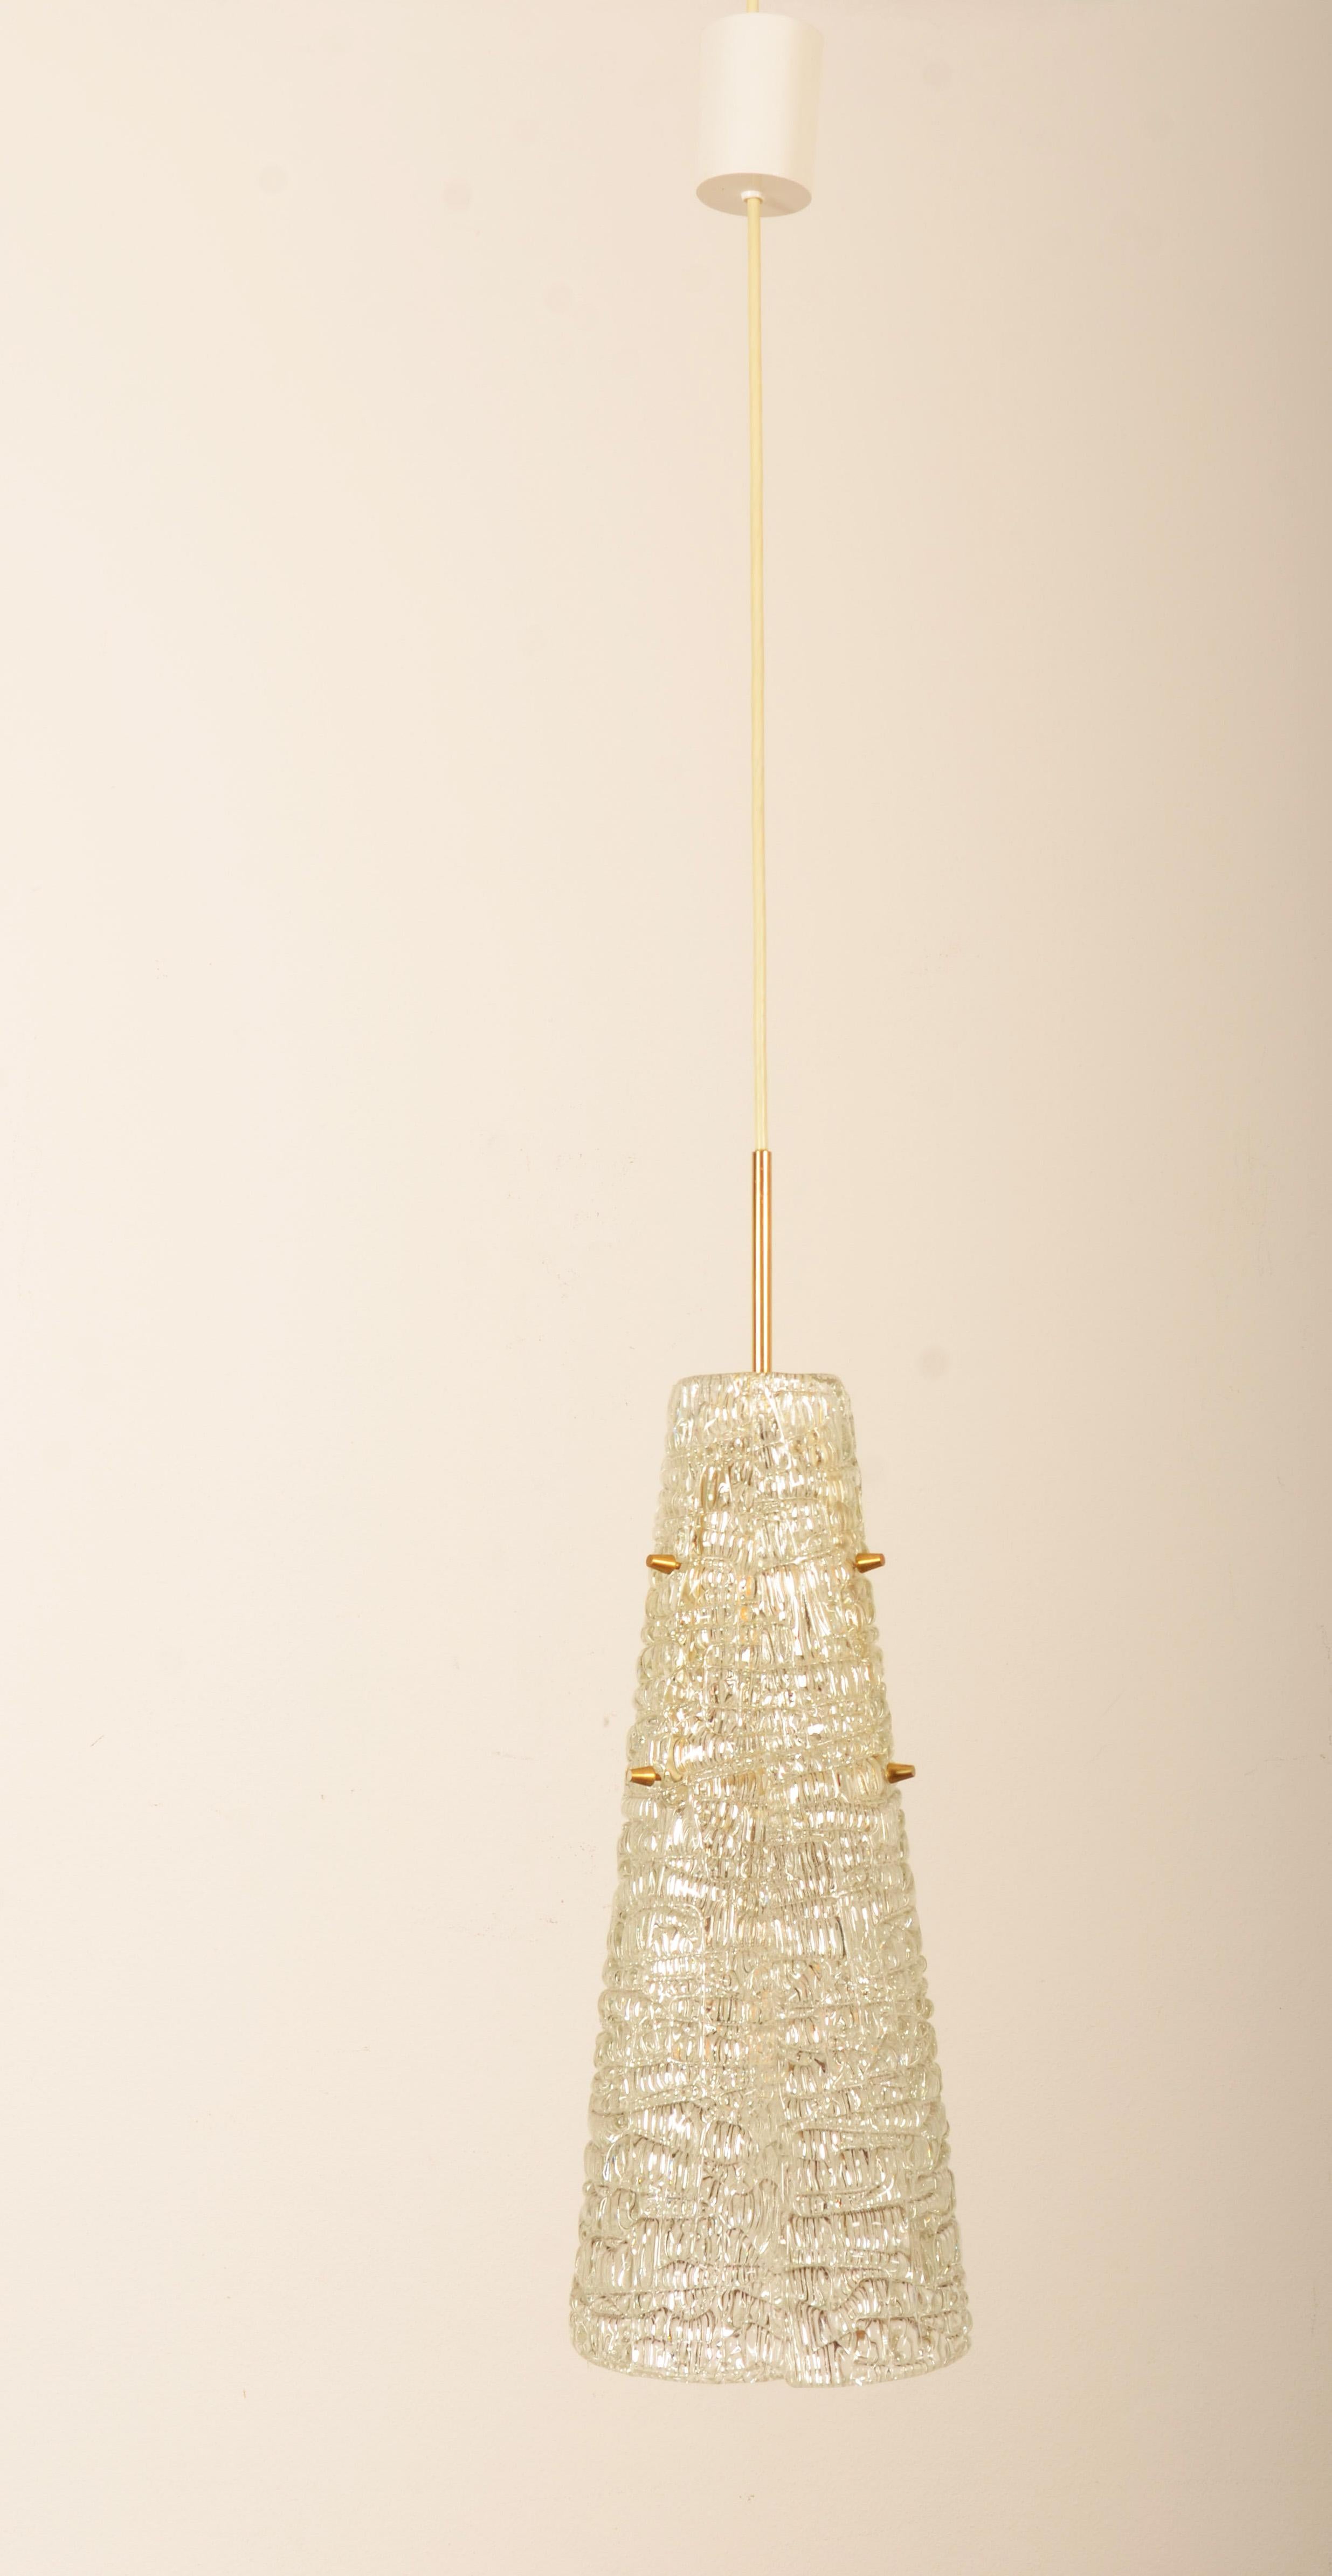 Midcentury J.T. Kalmar Crystal Glass Pendant Lamp In Good Condition For Sale In Vienna, AT